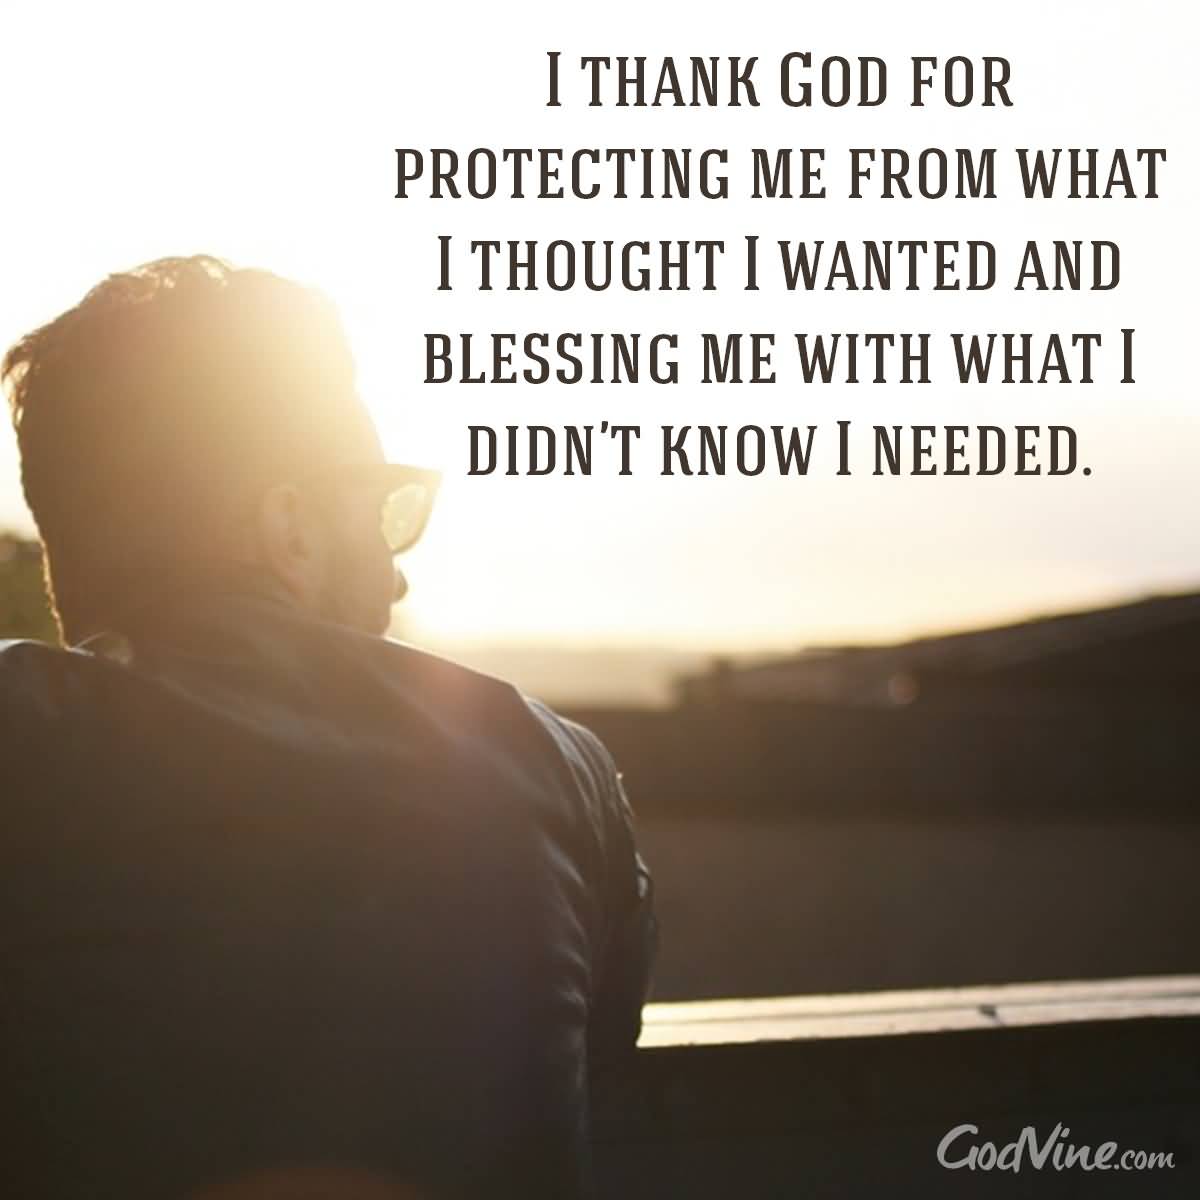 I Thank God For Protecting Me From What I Thought I Wanted And Blessing Me With What I Didn't Know I Needed